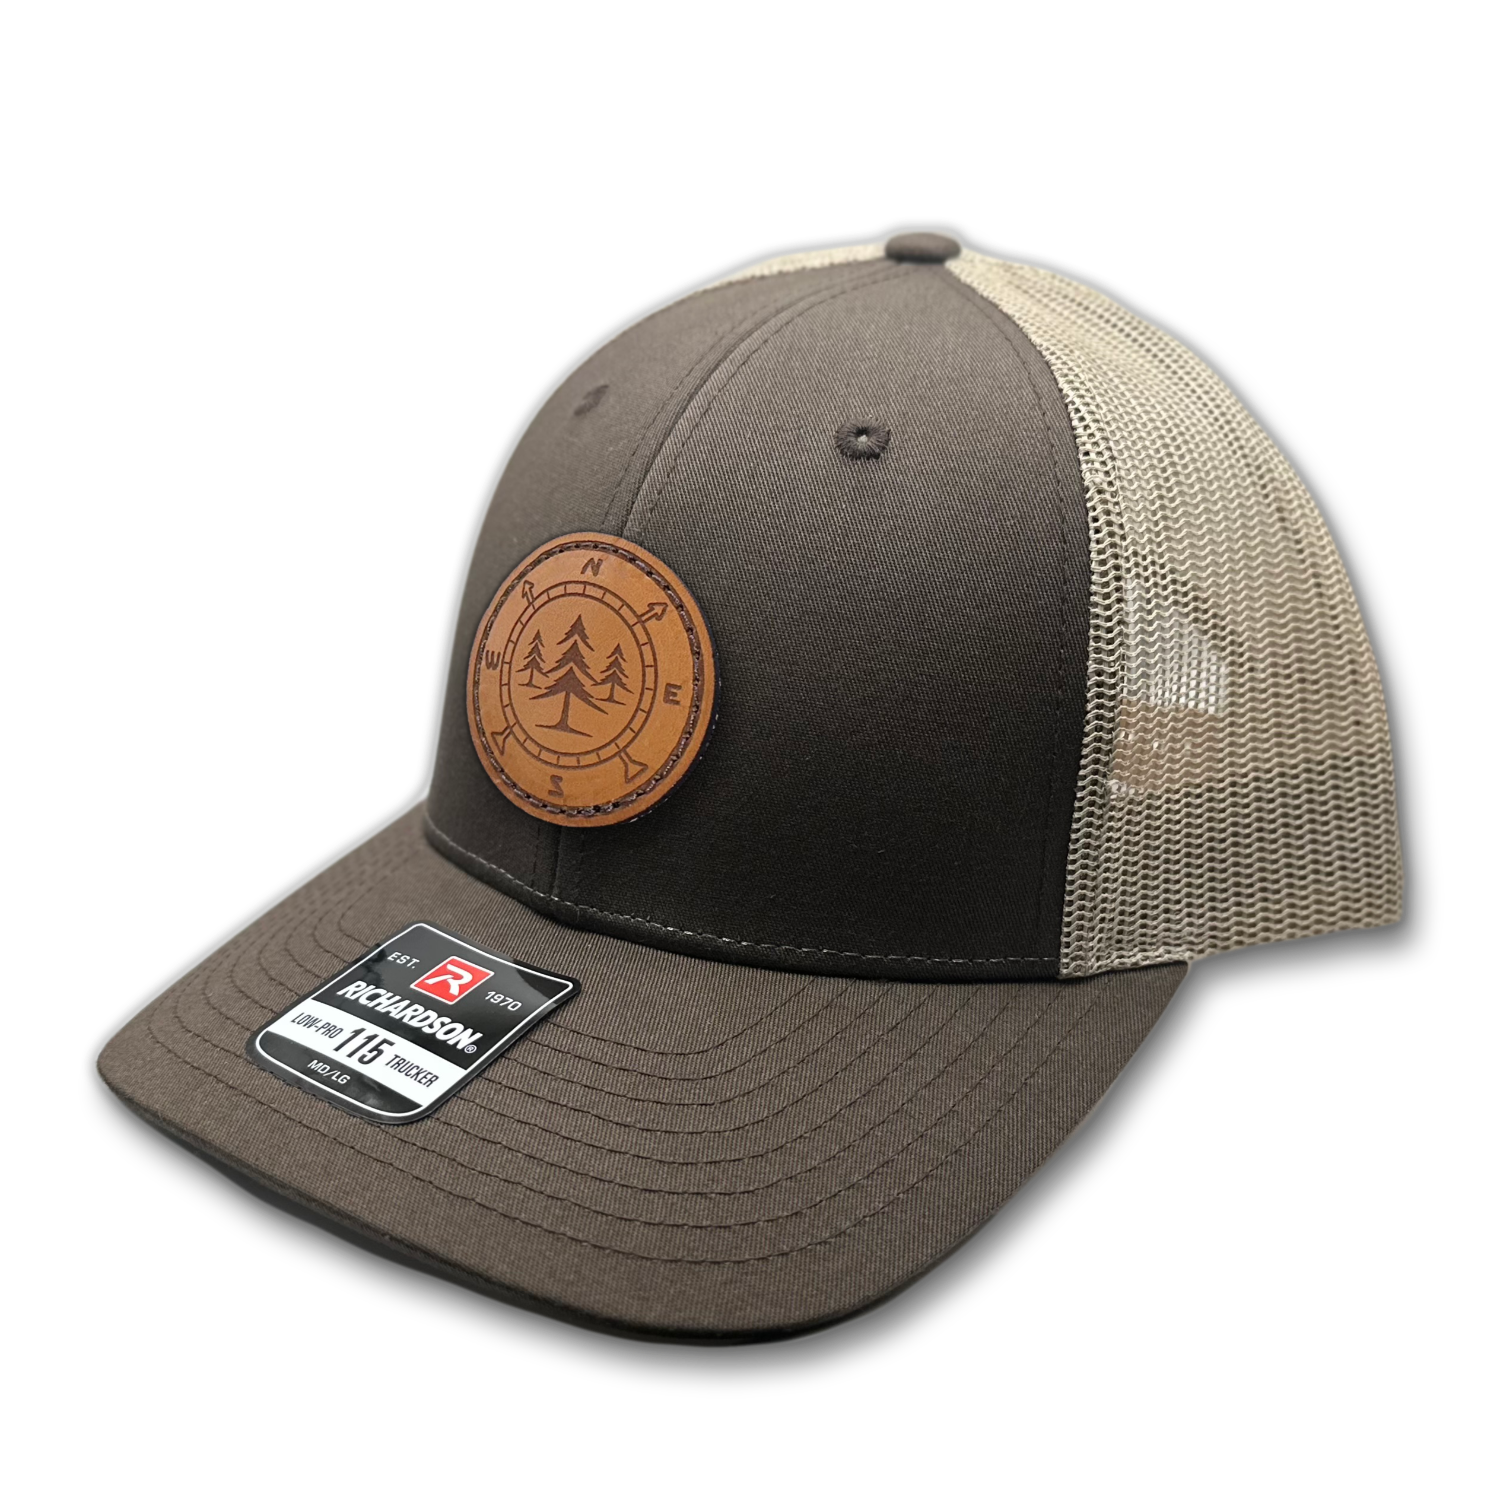 A high-quality leather patch hat named Lost Pines, showcasing a distinctive compass and pine trees design on a circular leather patch. Made in the USA, this hat features genuine leather craftsmanship and is affixed to a brown/khaki Richardson 115 low profile SnapBack hat. Available in small and m/l sizes and various colors, this unique hat is inspired by the picturesque mountains of Colorado. Perfect for hat enthusiasts and those seeking stylish leather patch designs.